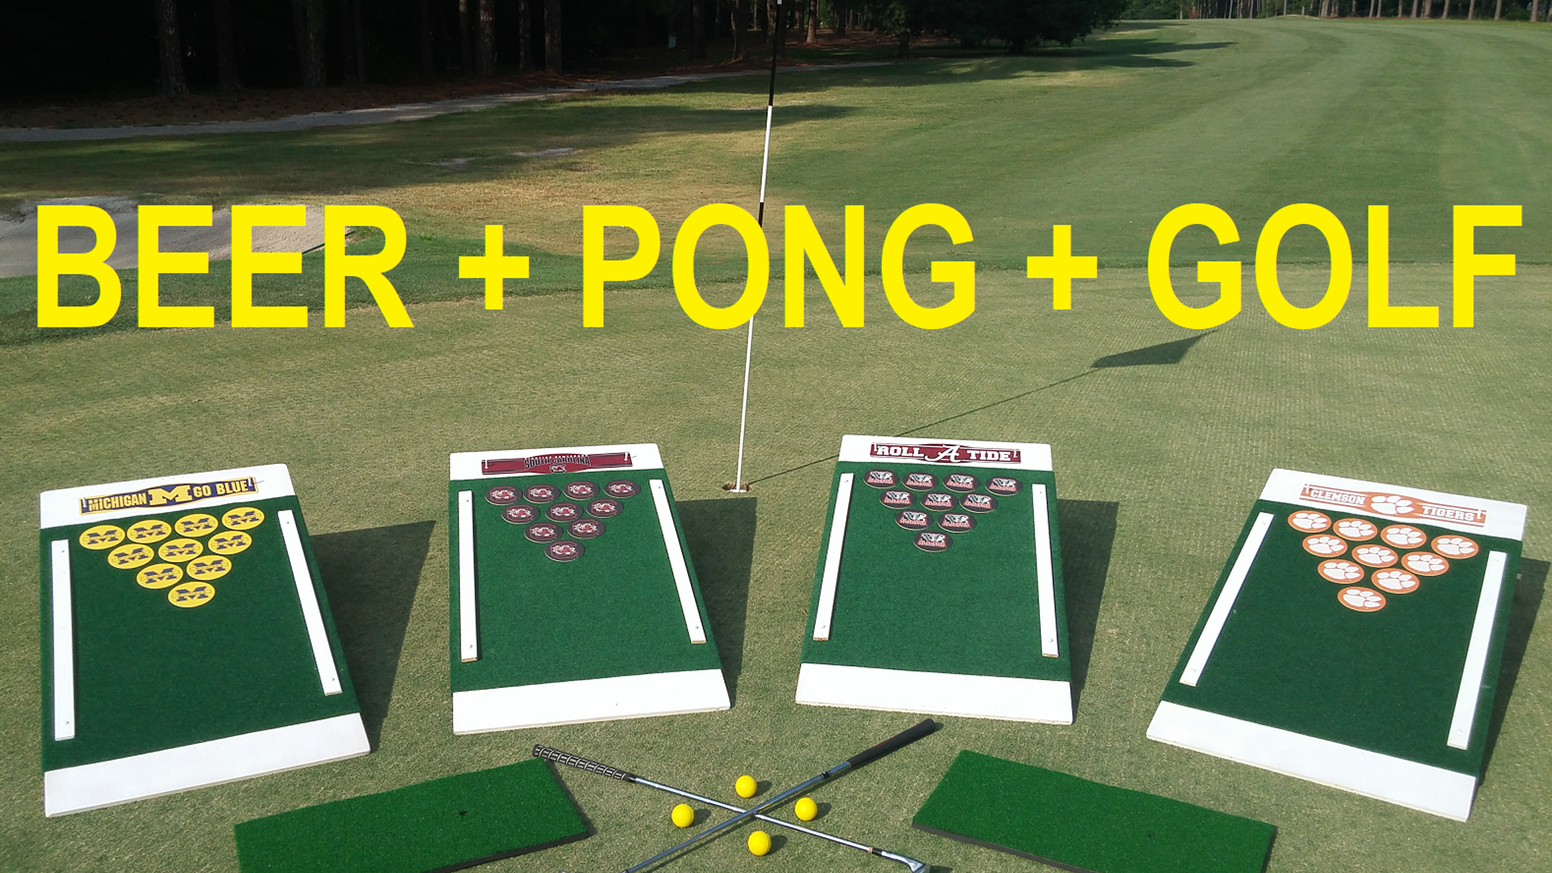 Screw the R&A - It's Beer Pong Golf!